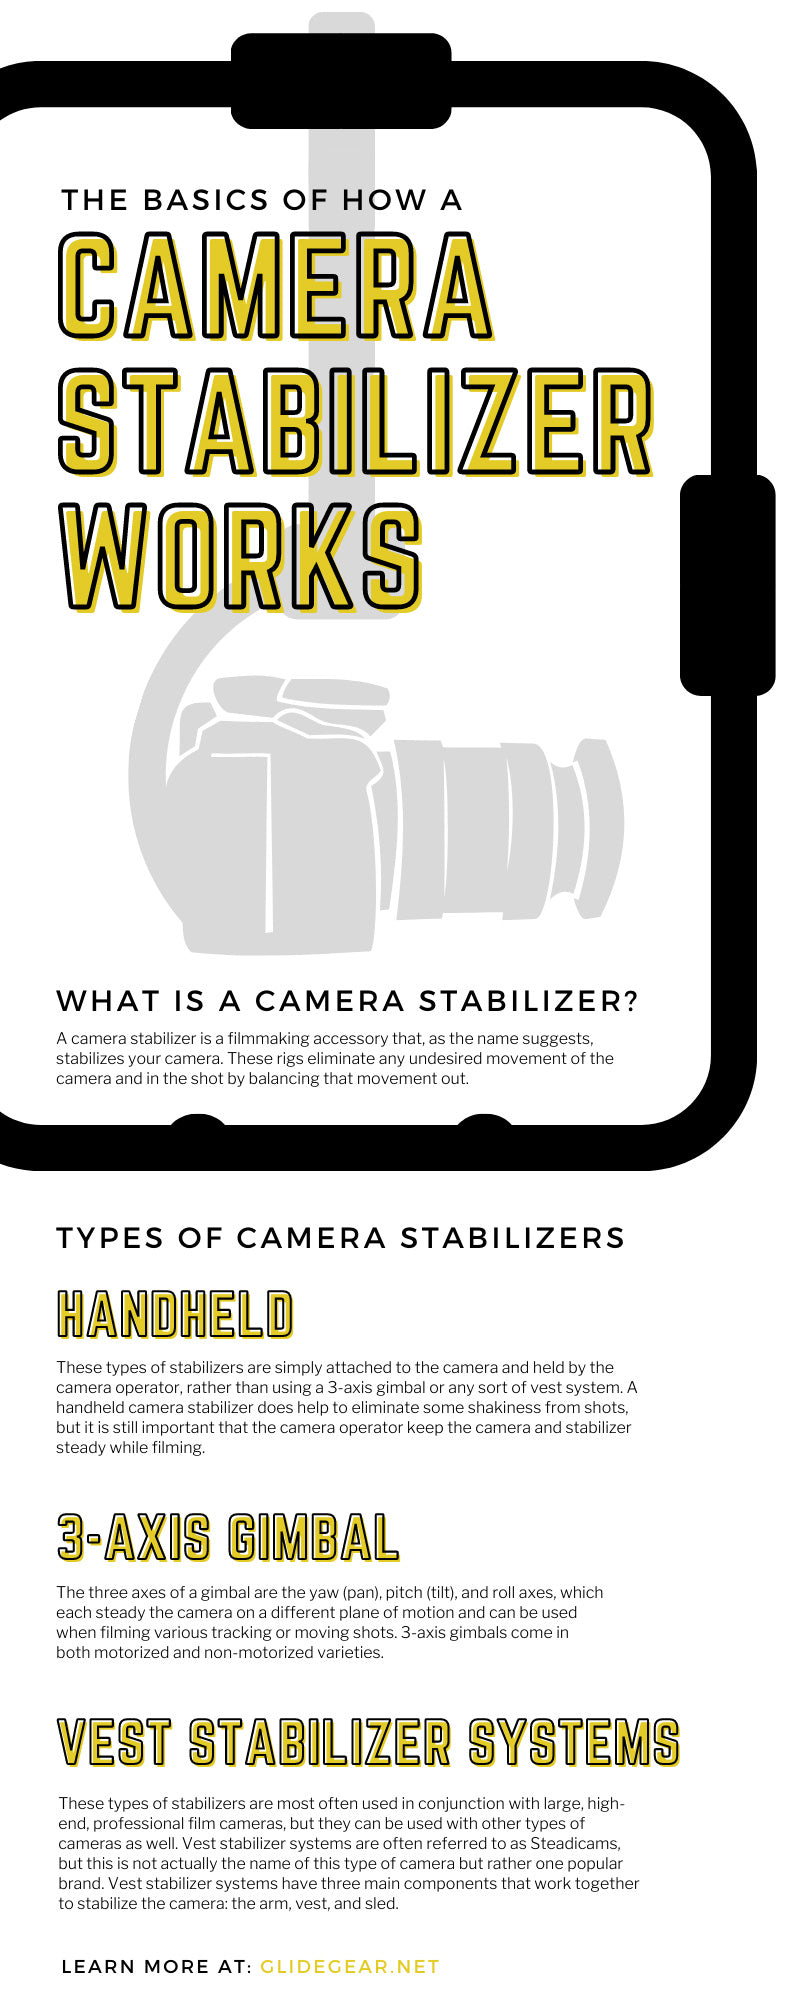 The Basics of How a Camera Stabilizer Works